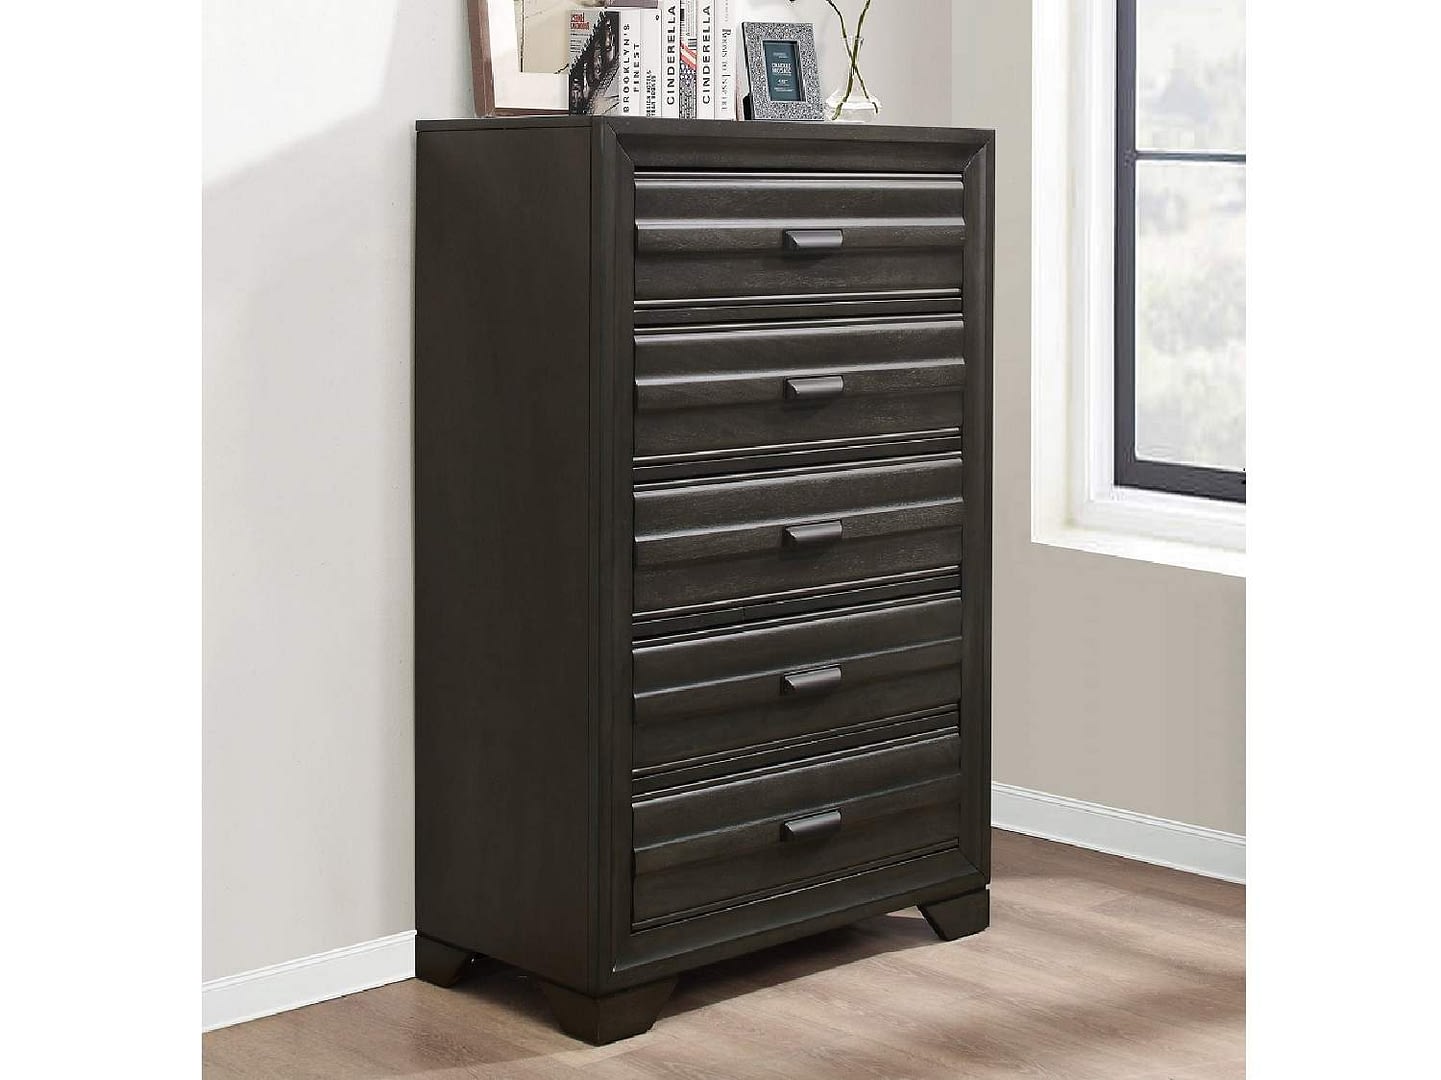 MARTHA Chest of Drawers